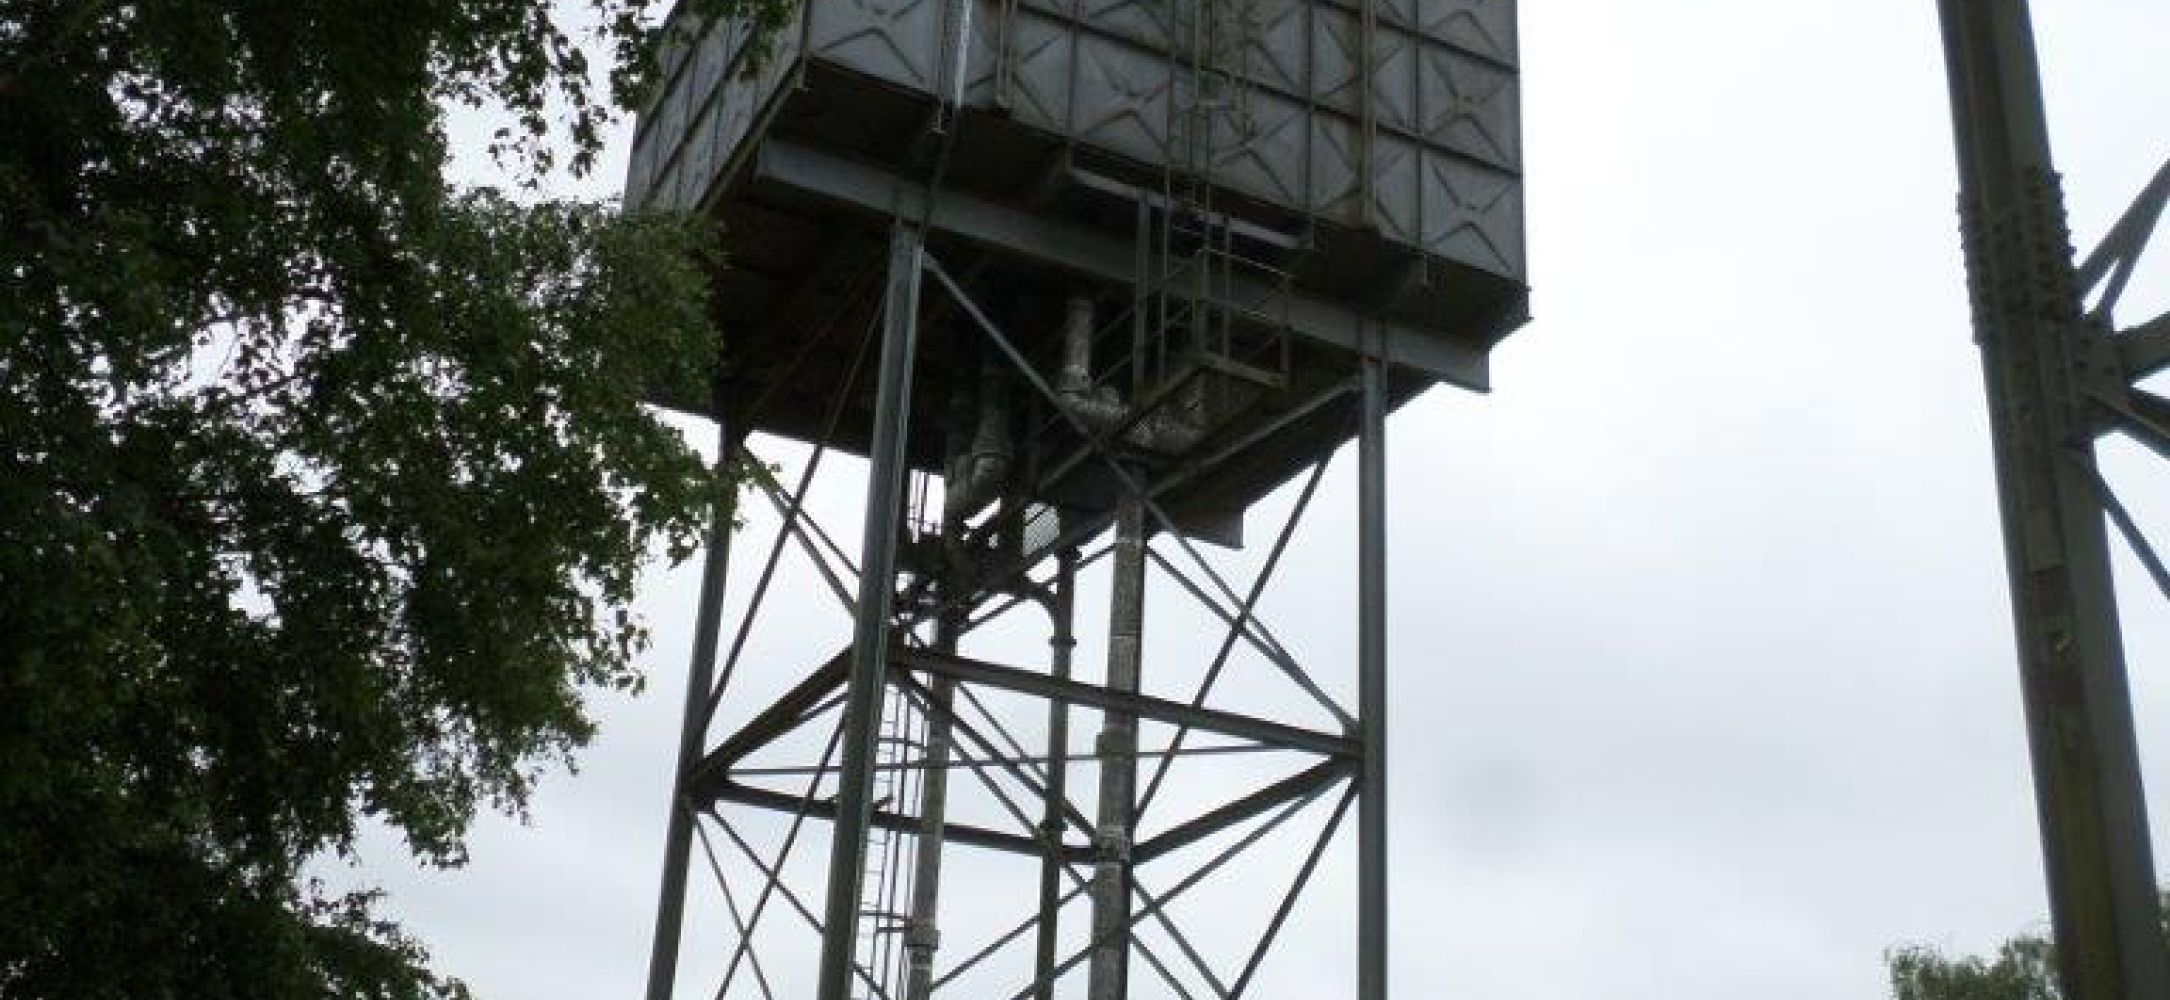 BDB AWARDED CONTRACT FOR THE REMOVAL OF 3 REDUNDANT WATER TOWERS AS PART OF MAJOR UTILITIES UPGRADE.